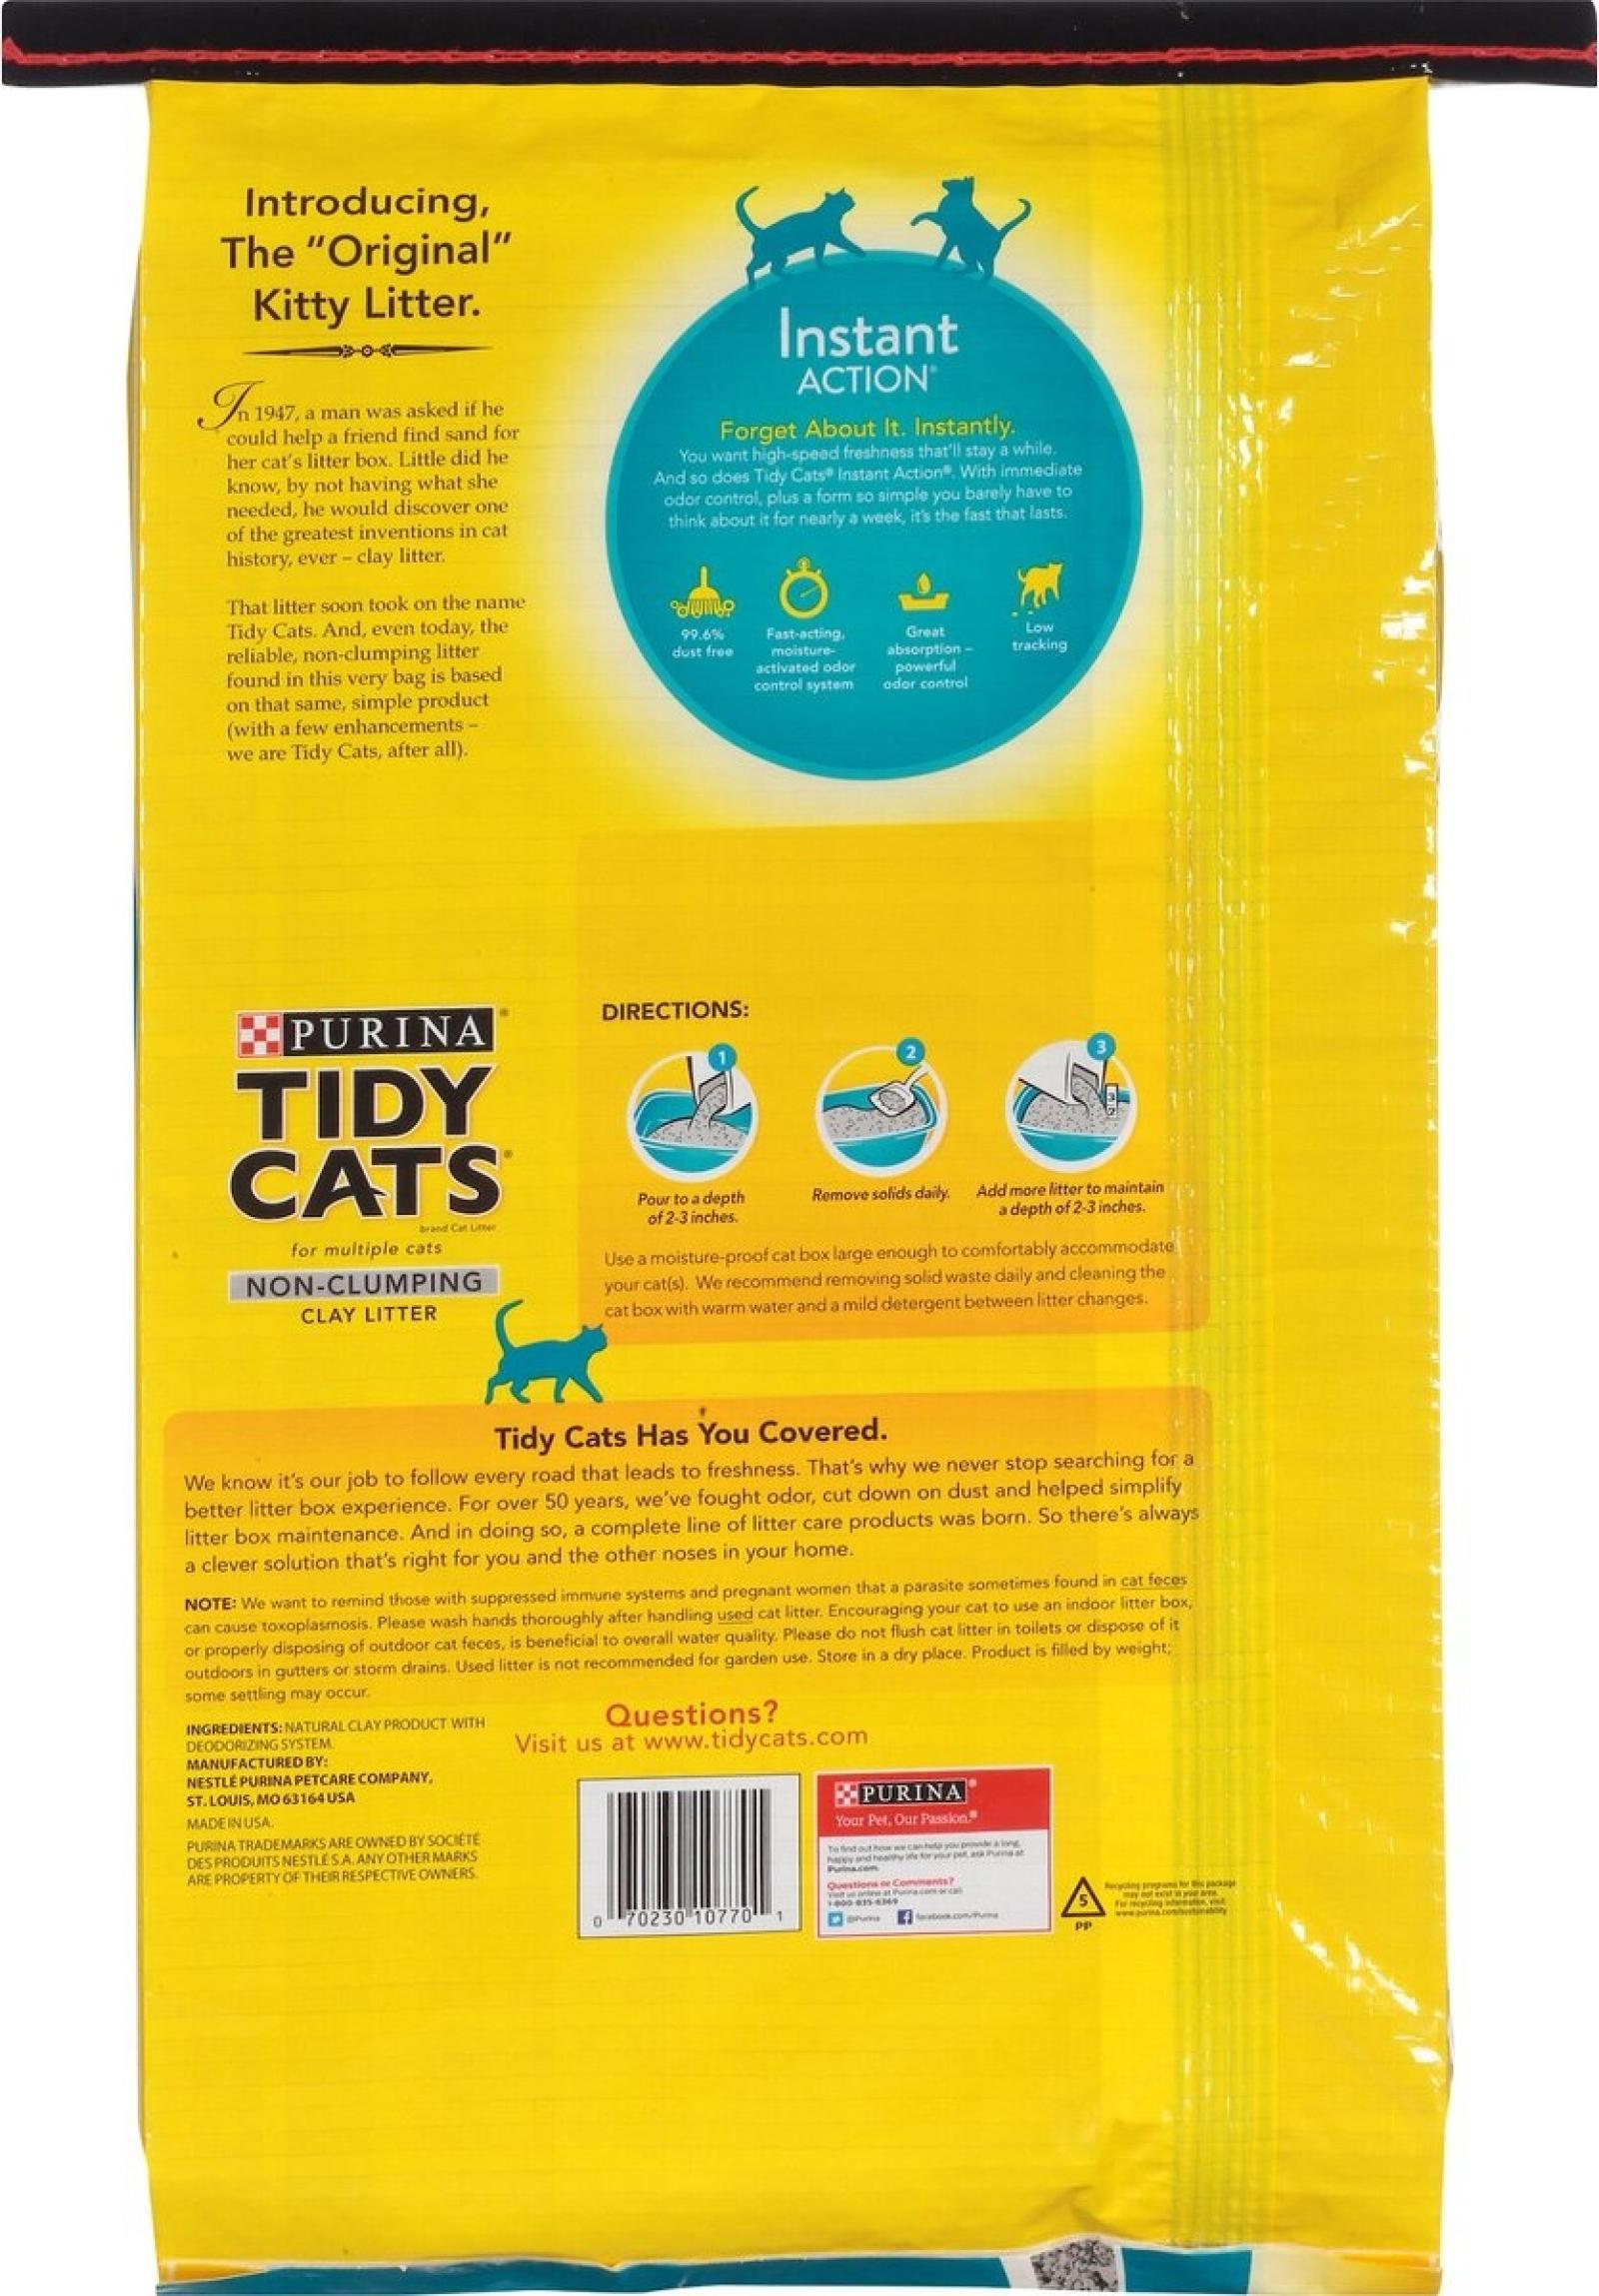 Purina Tidy Cats Instant Action Non Clumping Clay Litter